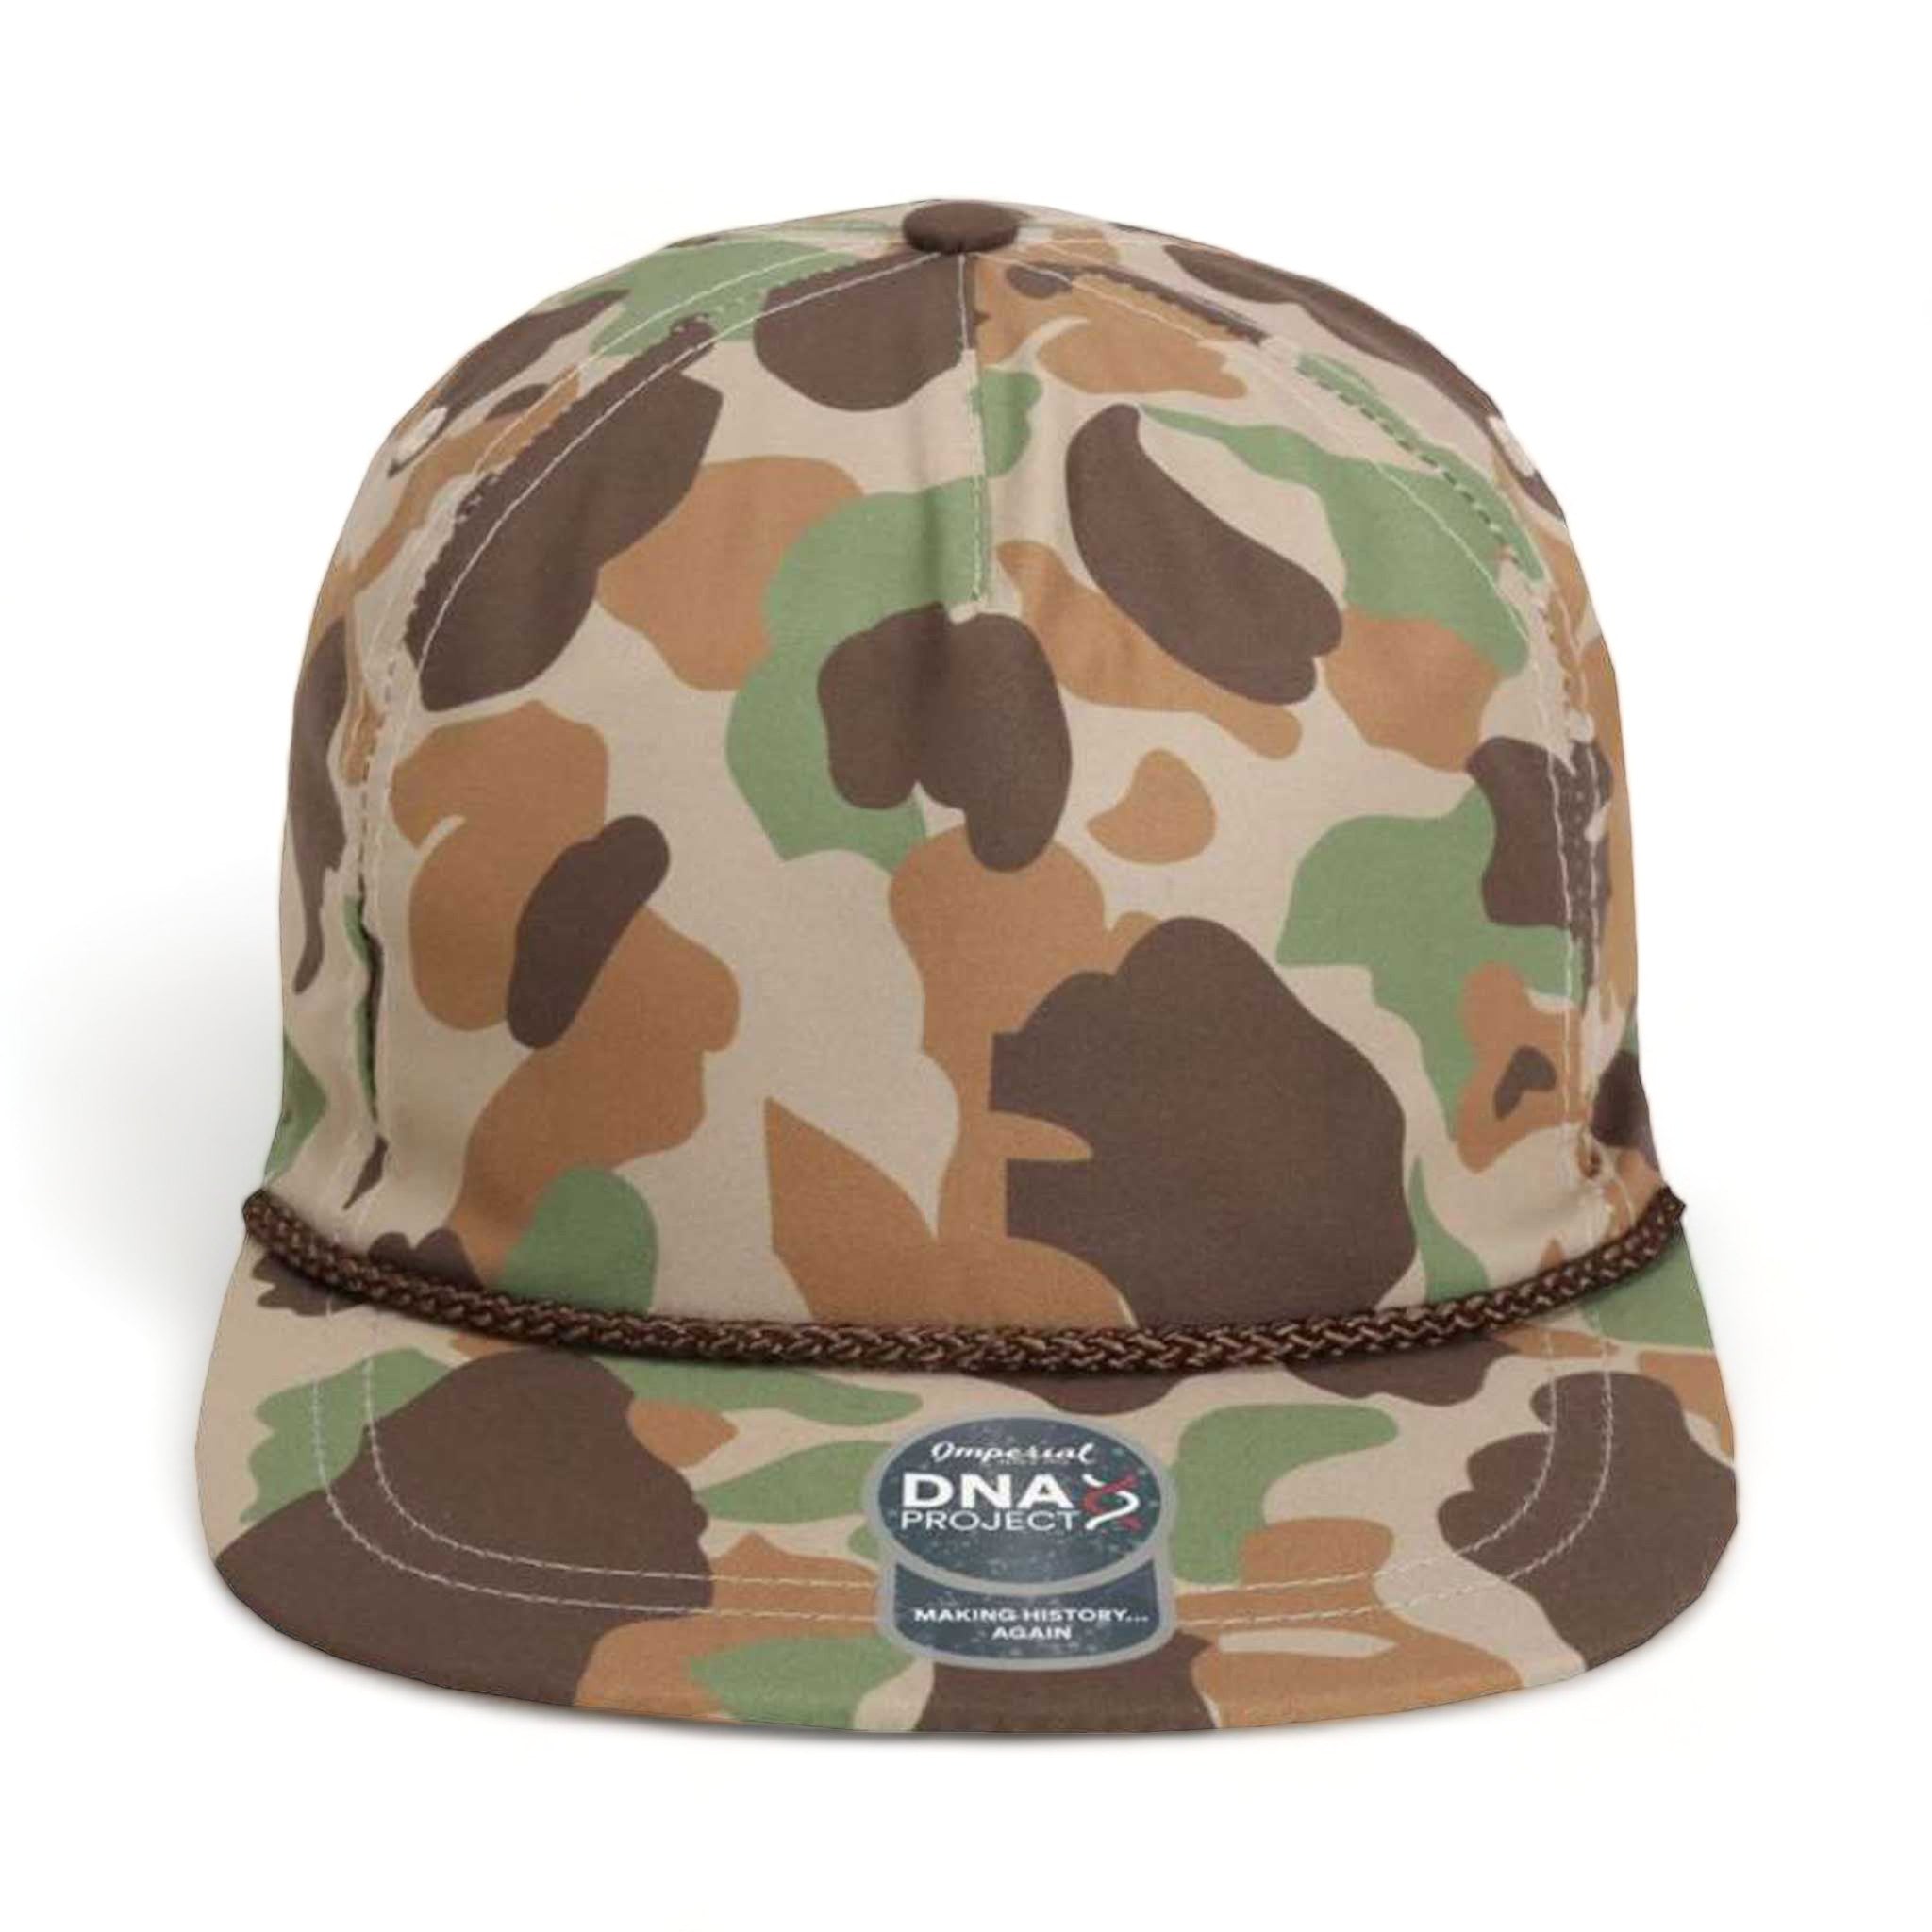 Front view of Imperial DNA010 custom hat in frog skin camo and brown